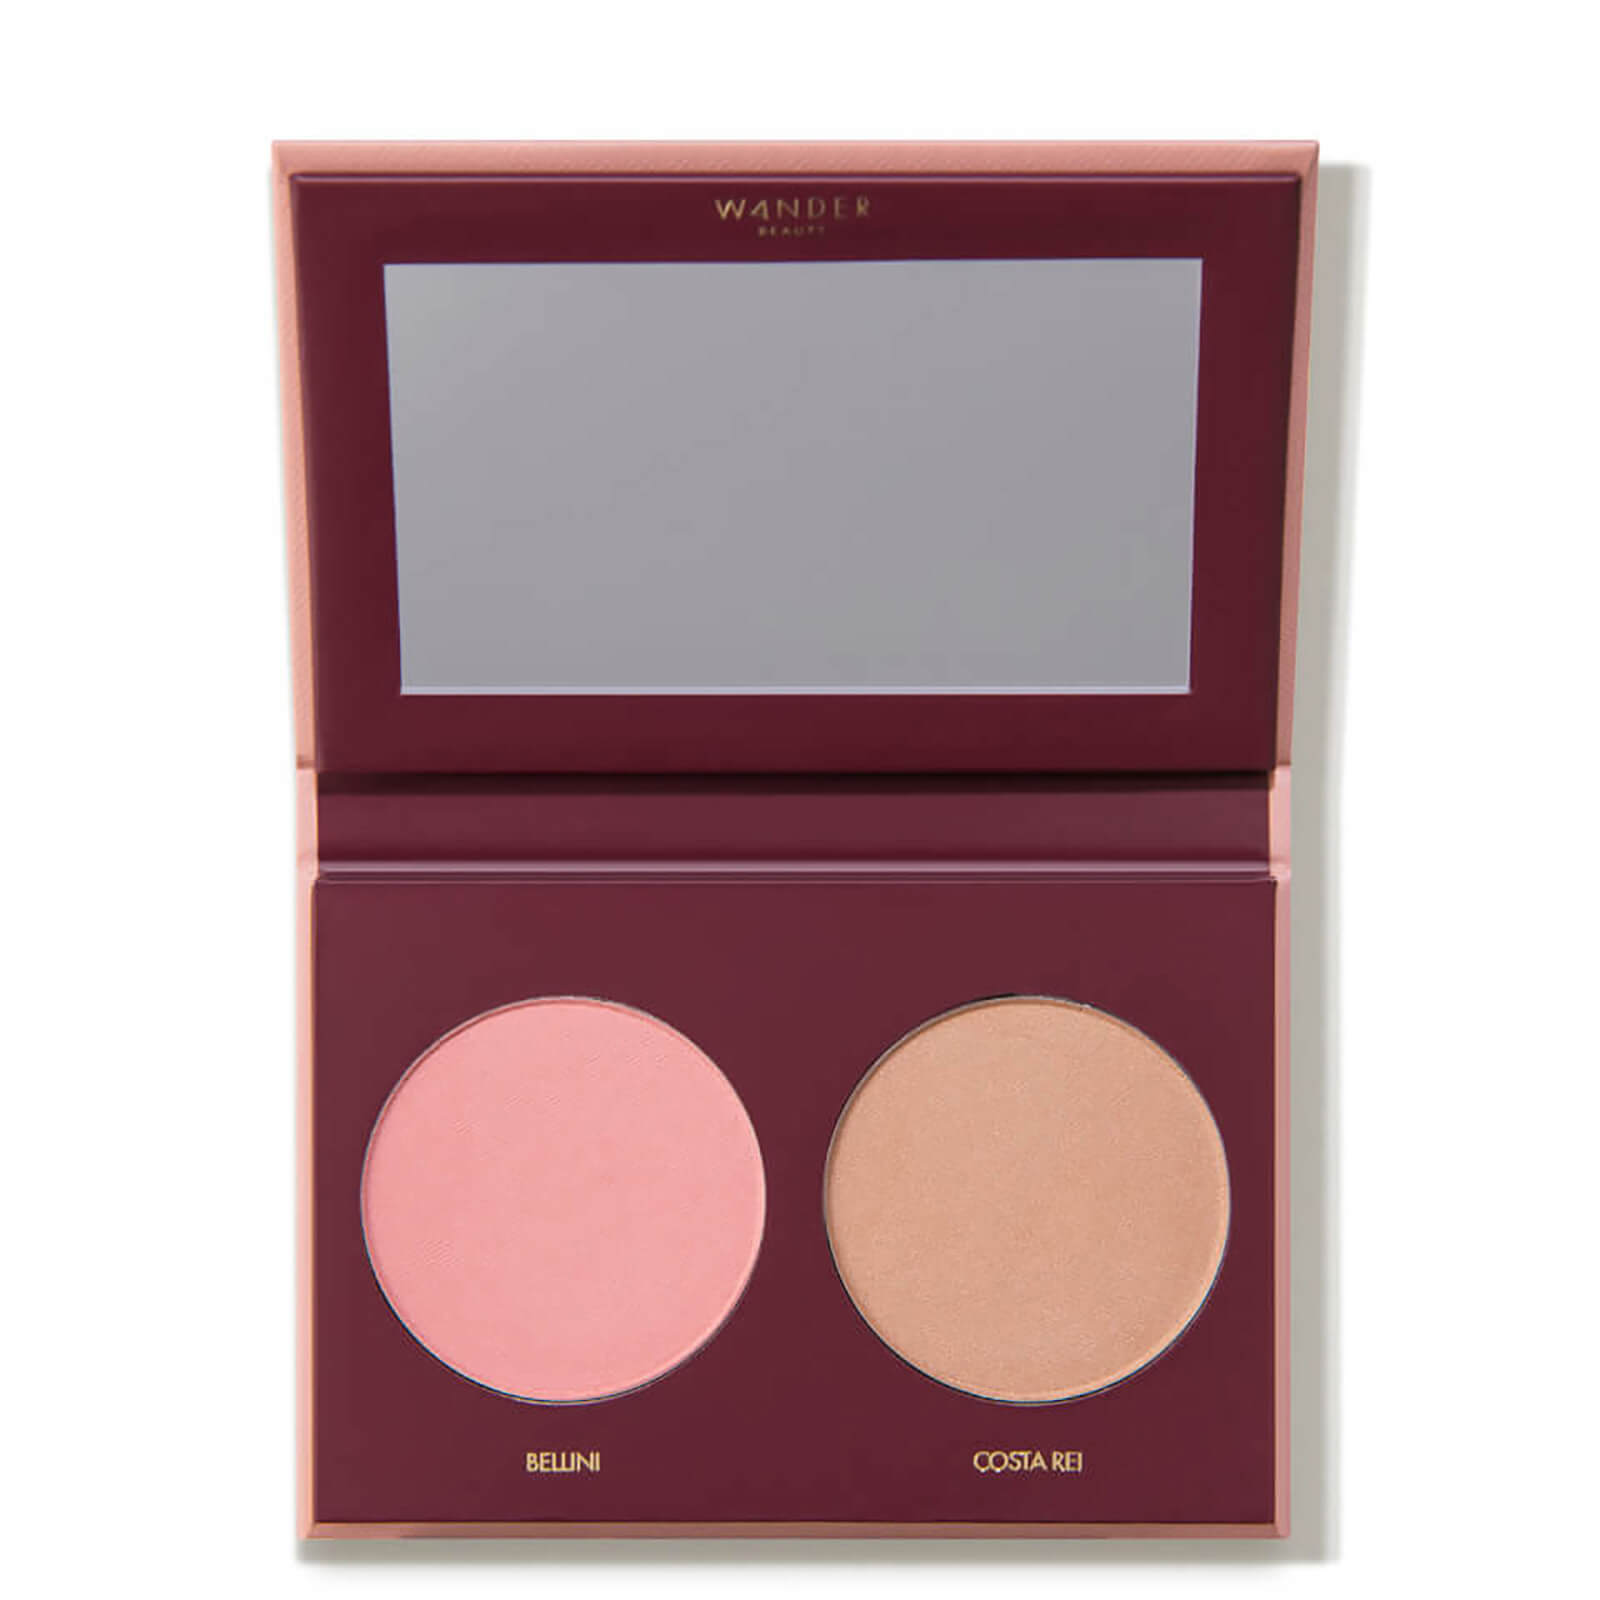 Wander Beauty Trip for Two Blush and Bronzer Duo 1 piece - Bellini/Costa Rei